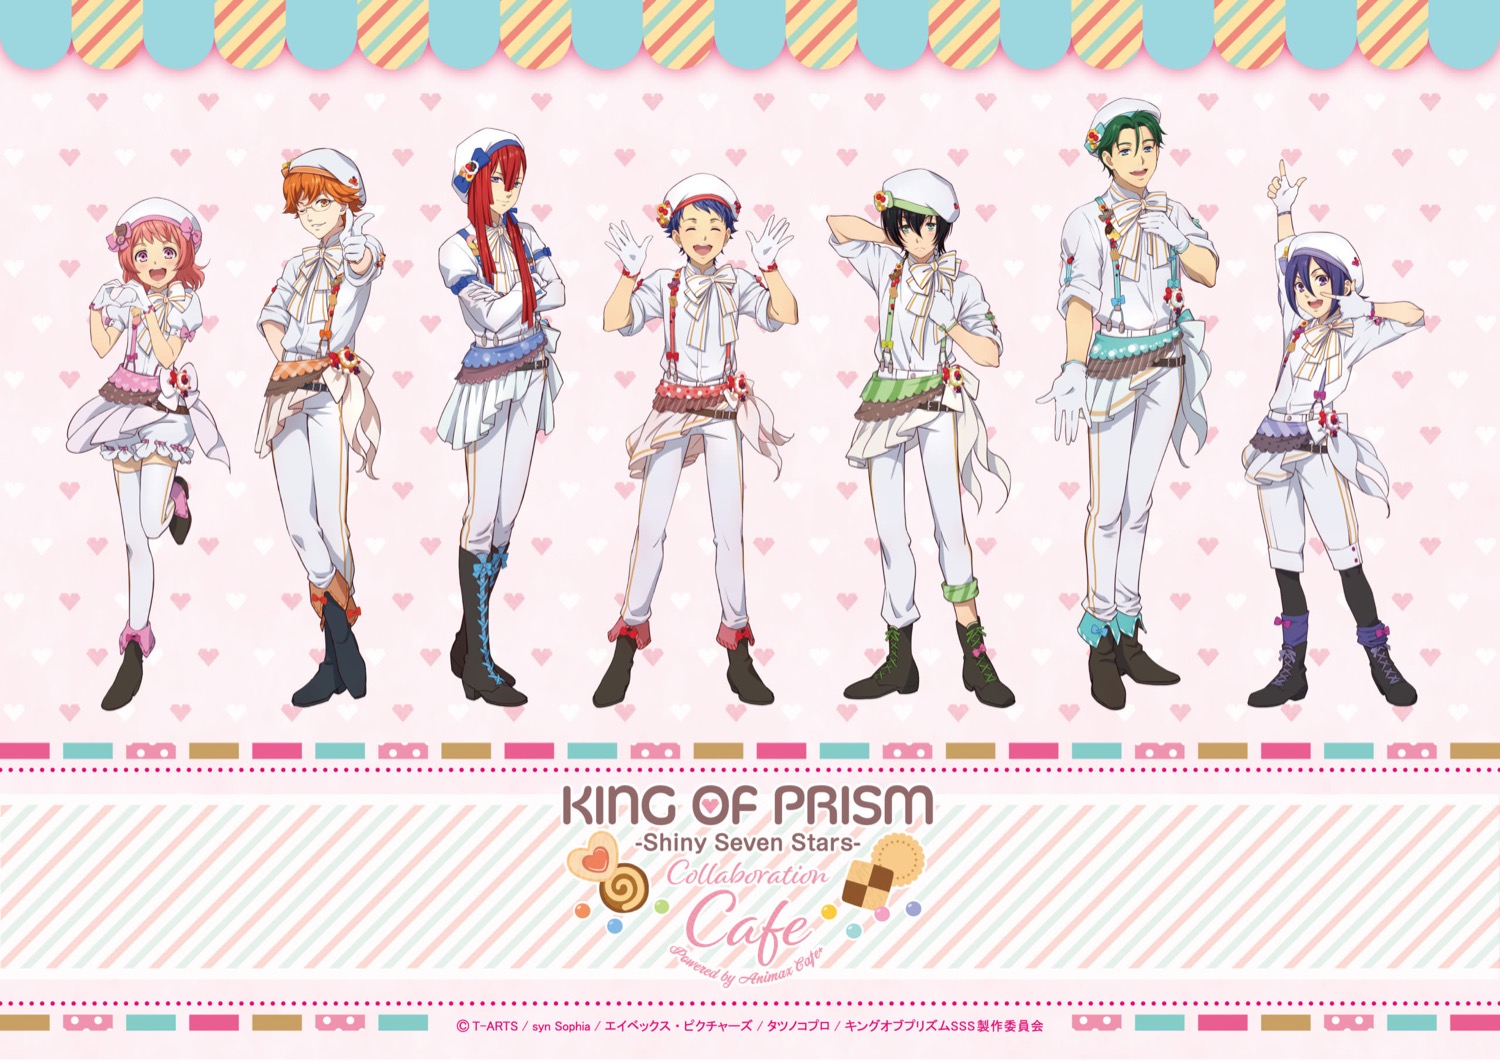 KING OF PRISMカフェ in Animax Cafe+原宿 11.7-12.6 コラボカフェ開催!